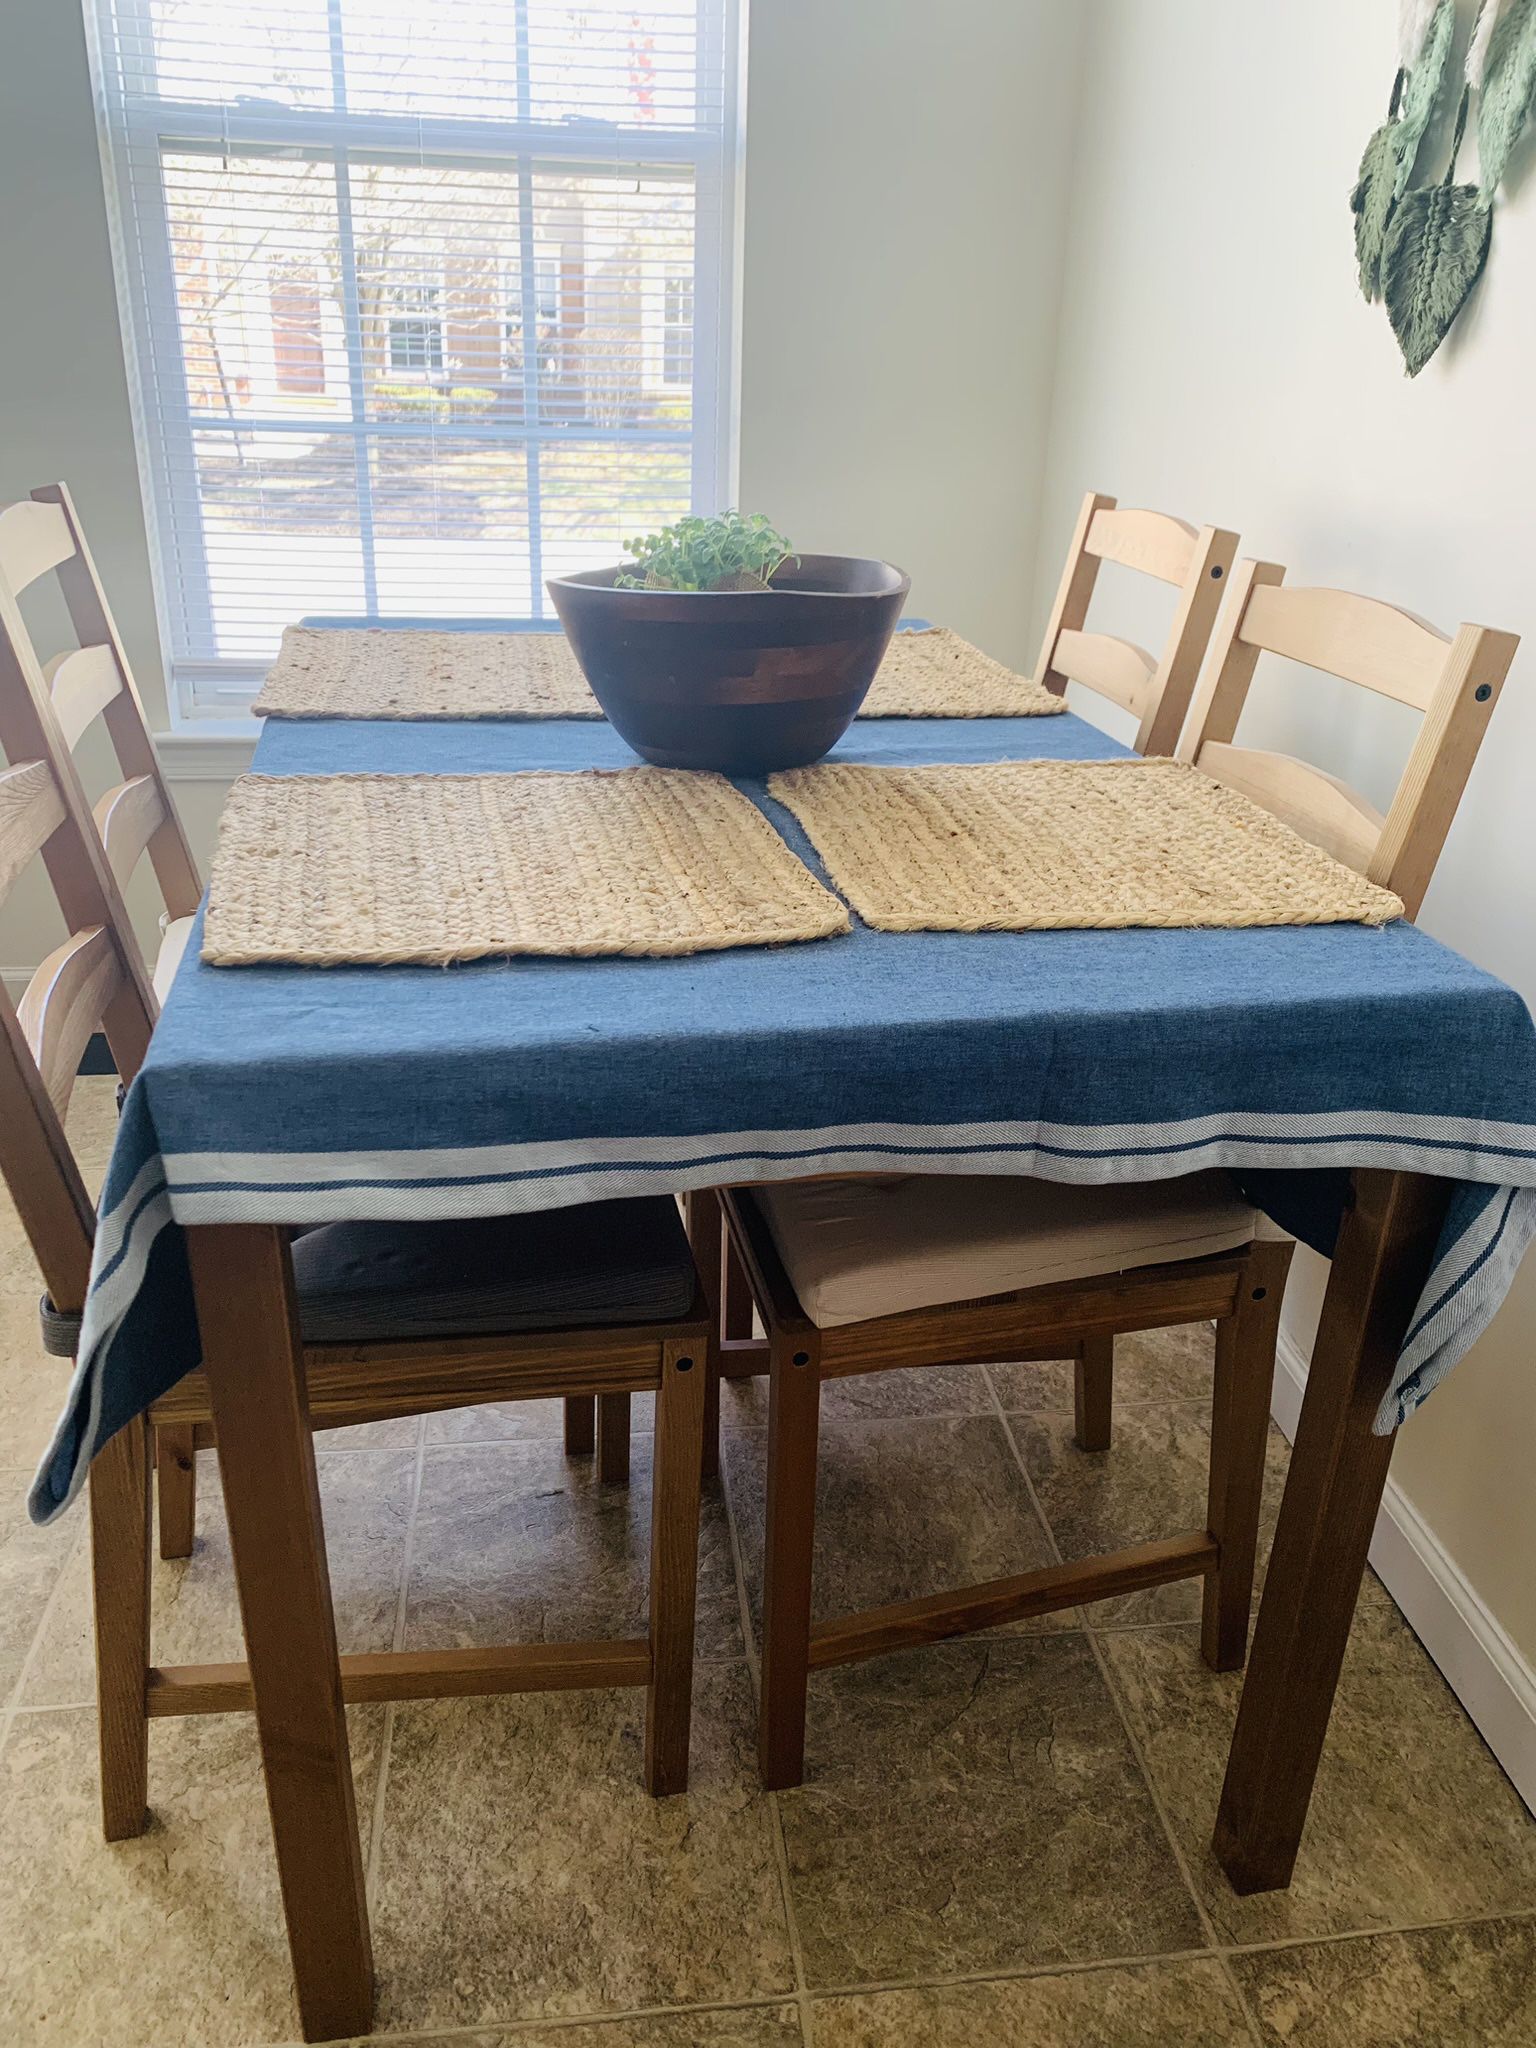 IKEA Dining Table And Chairs